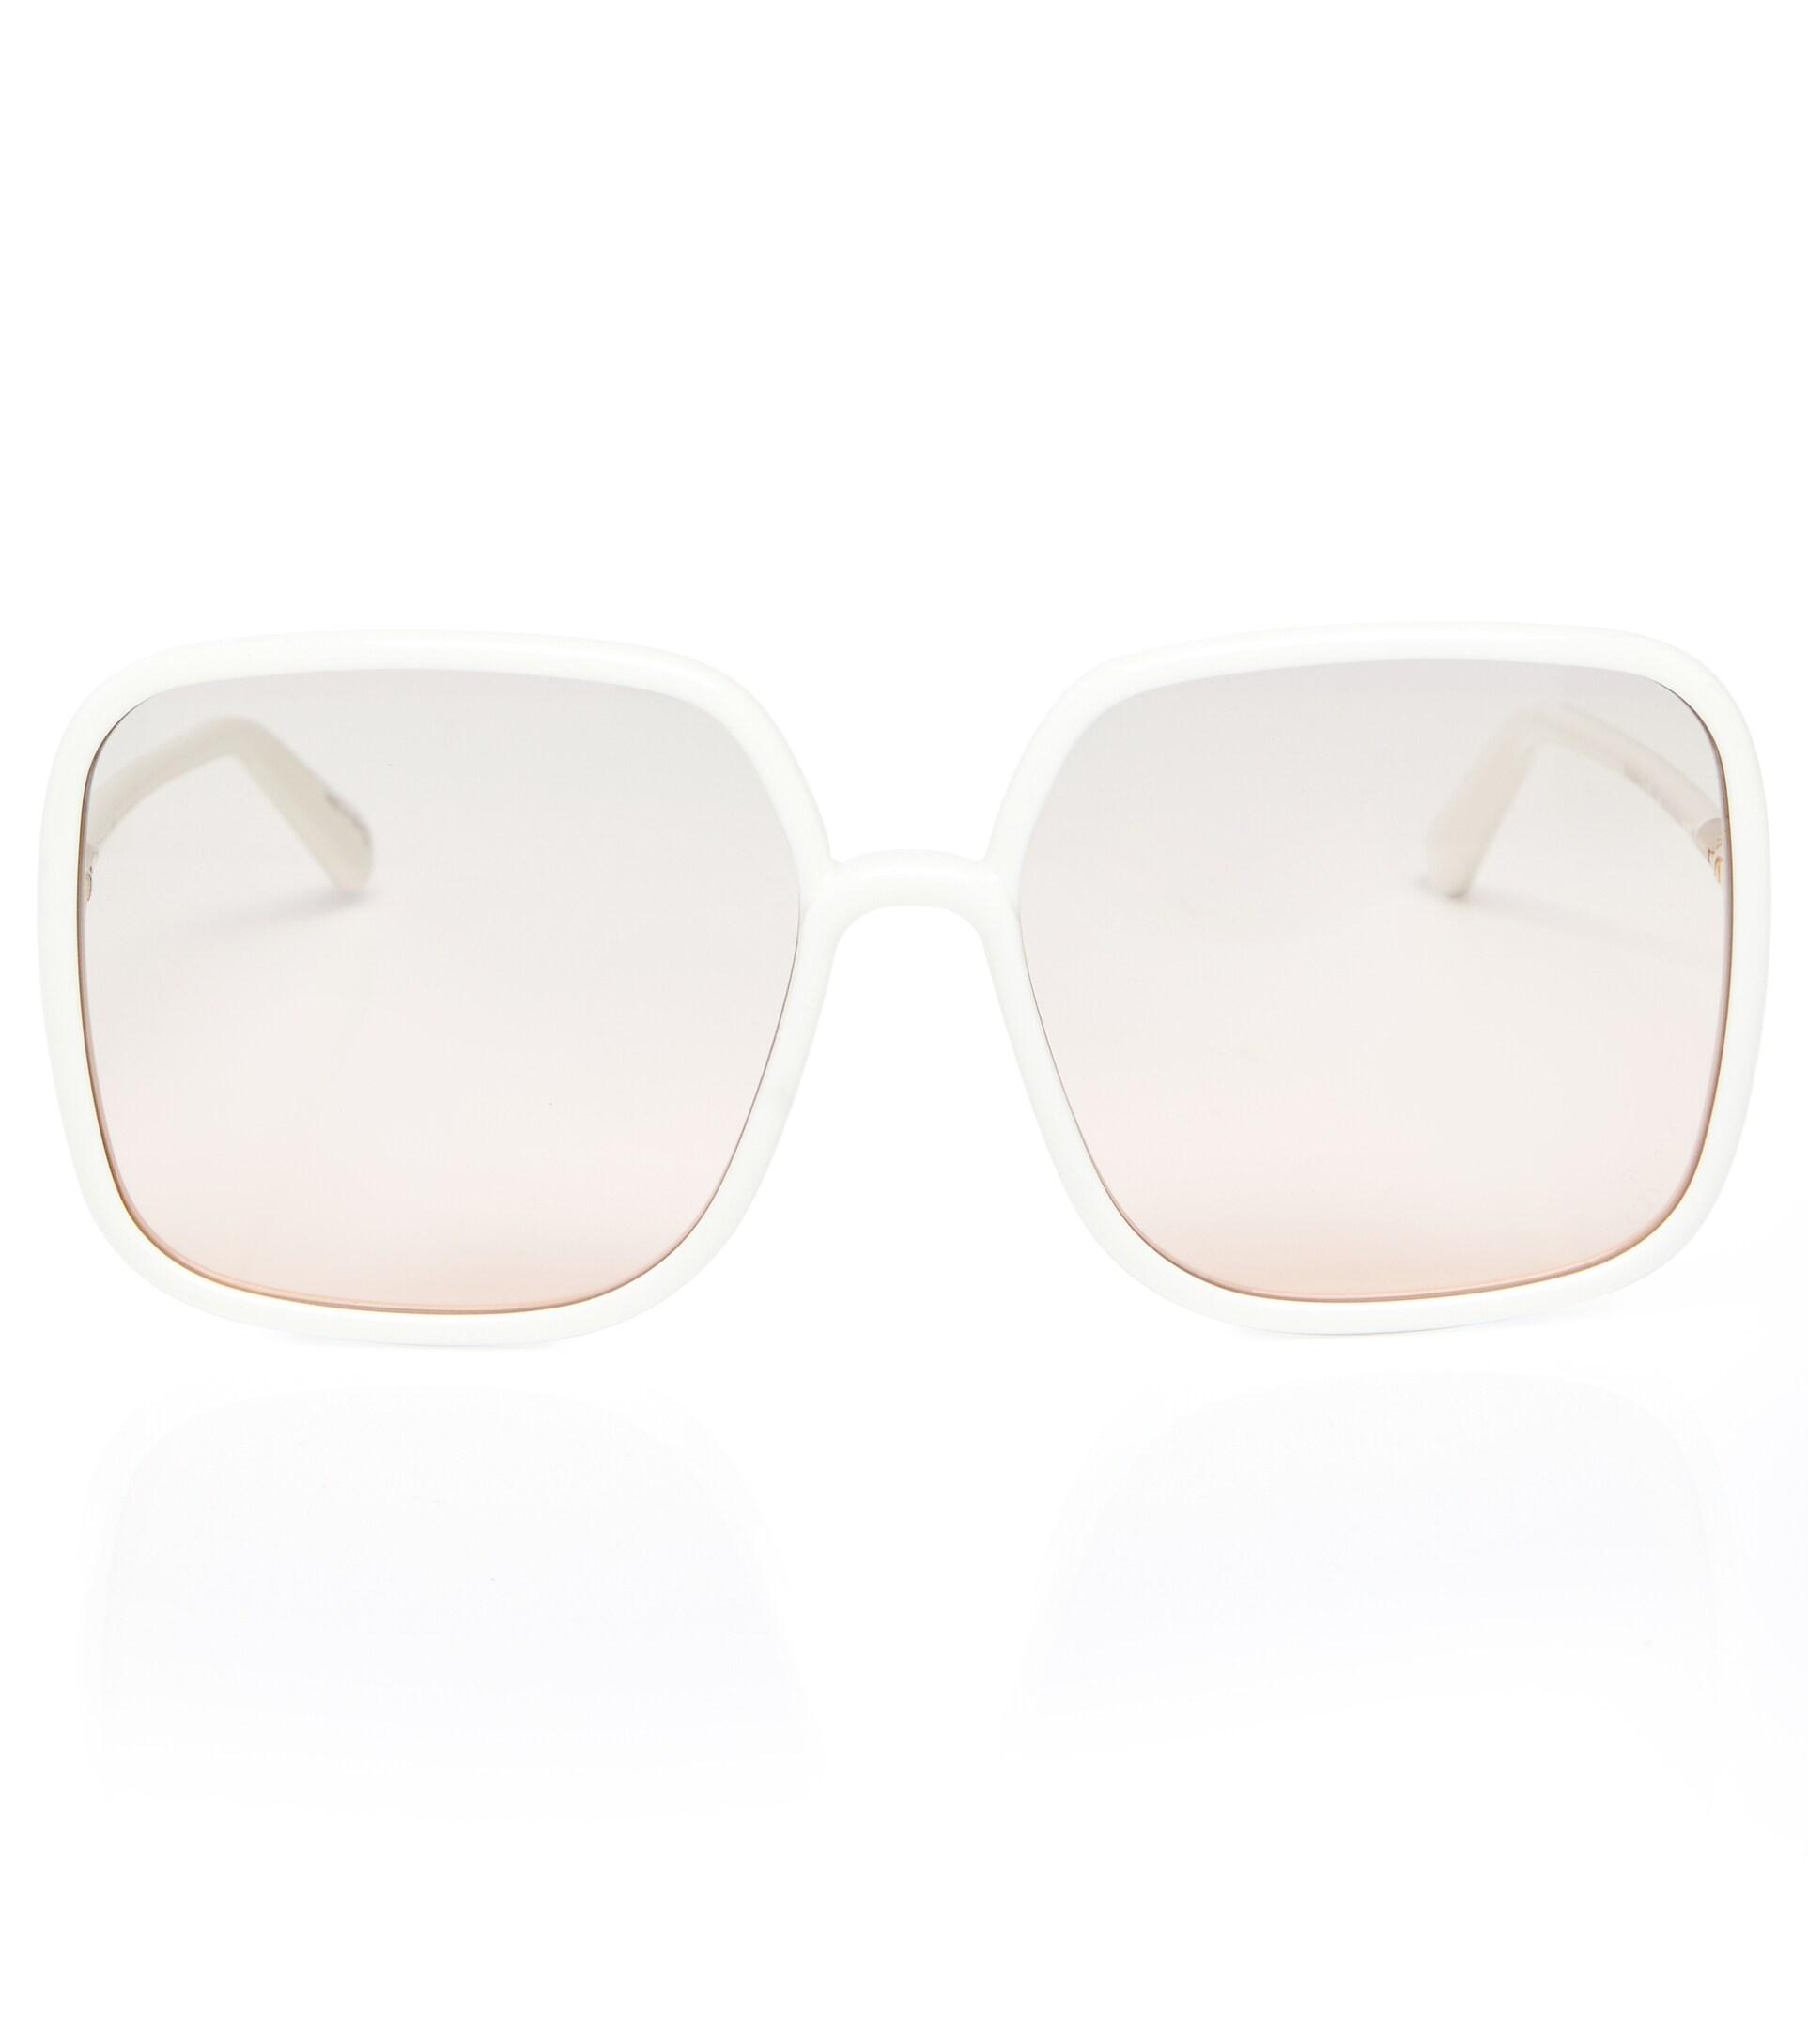 Dior Synthetic Diorsostellaire S1u Sunglasses in Shiny Ivory/Beige 